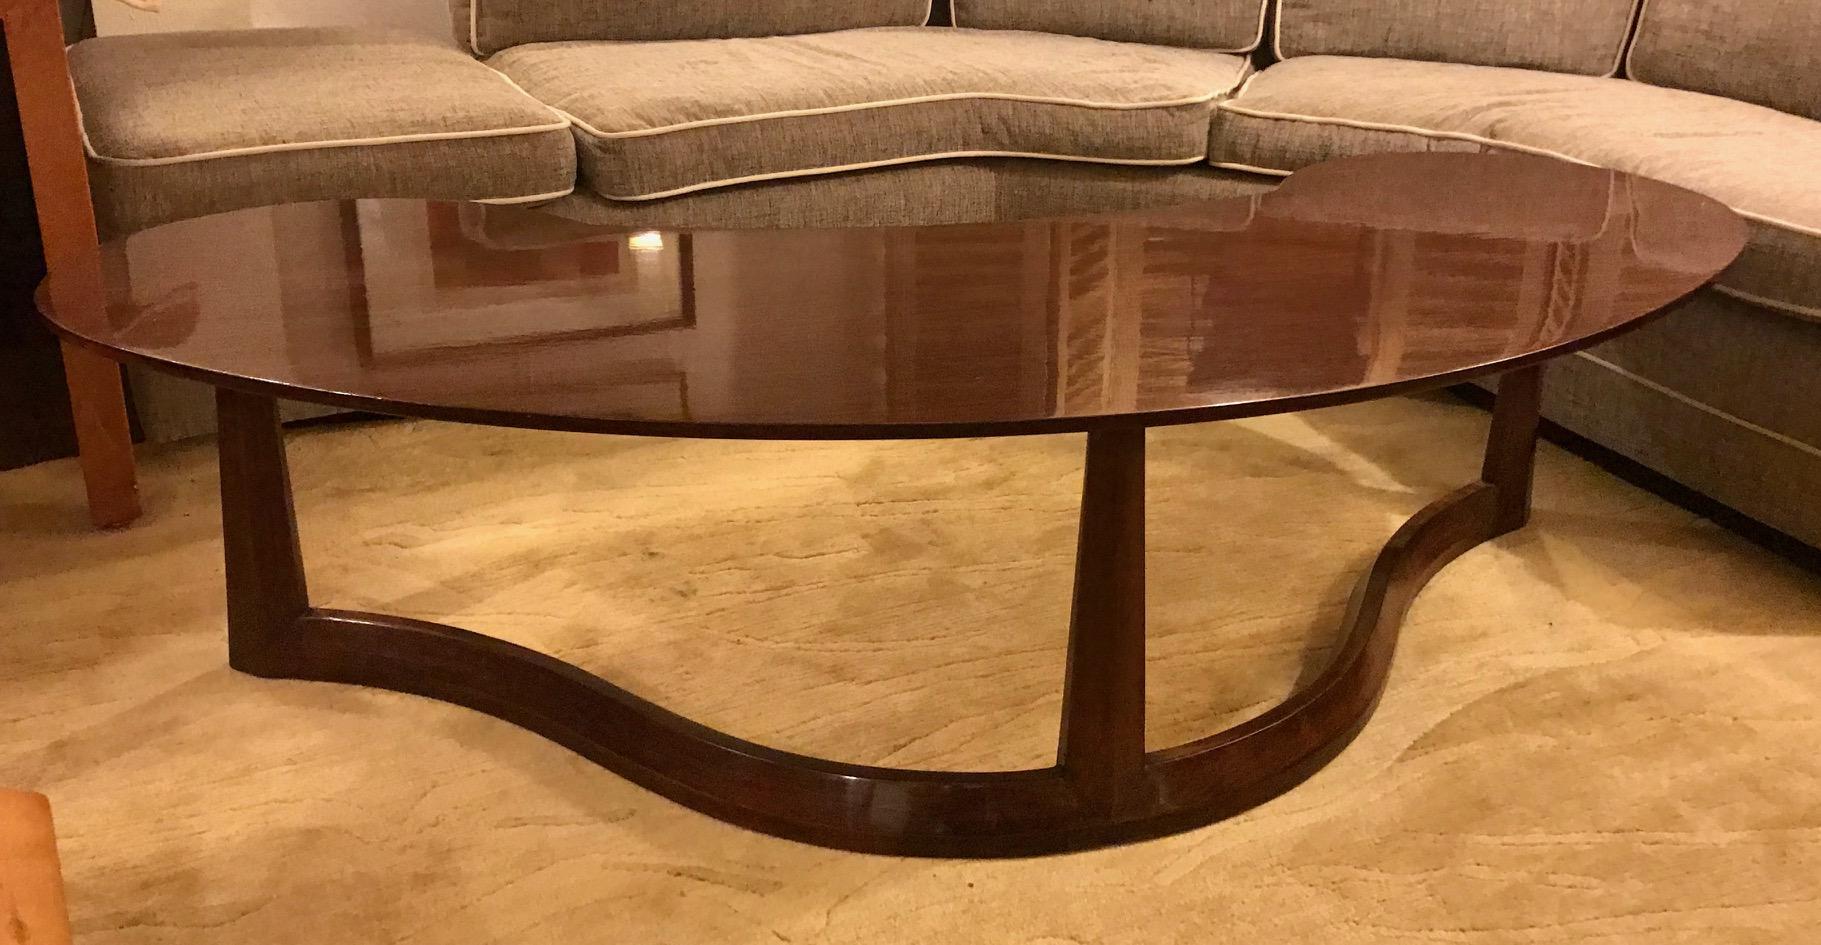 Widdicomb Furniture Company

Crescent shape midcentury coffee table with tripod serpentine base and tapered legs.

Date of manufacture 1960.